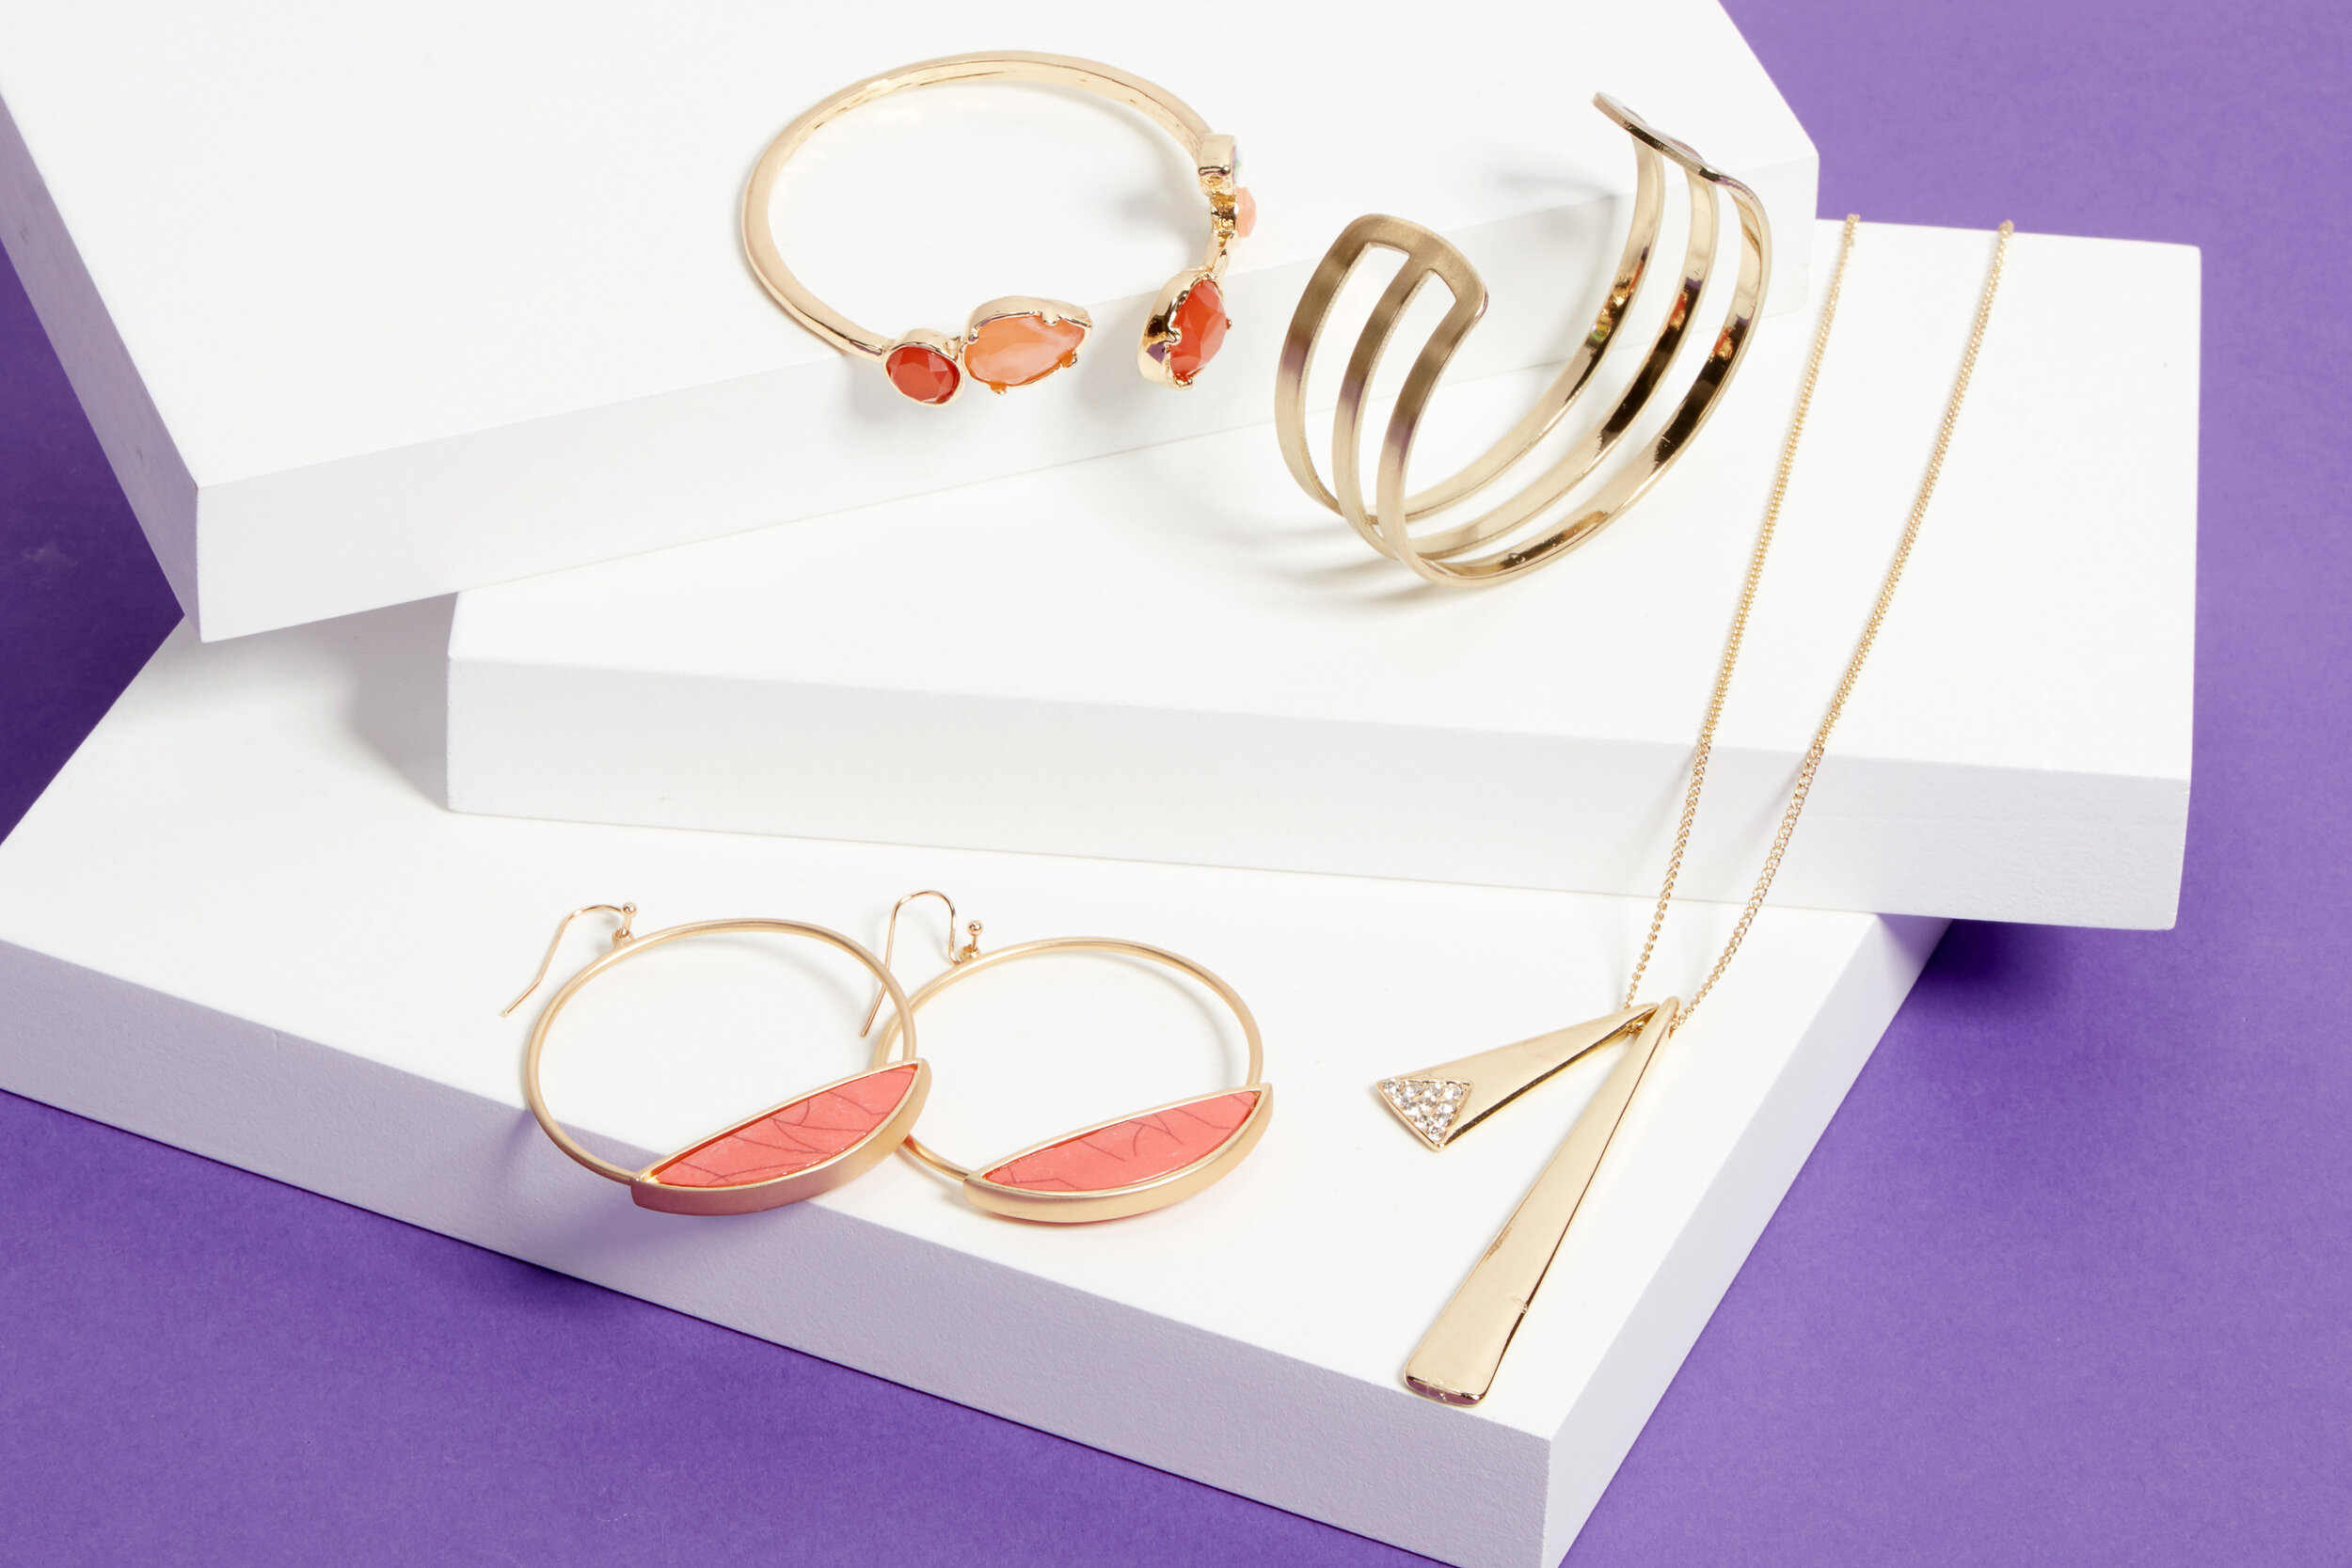 OLIVIA WELLES JEWELRY UP TO 75% OFF 337235-020.jpg